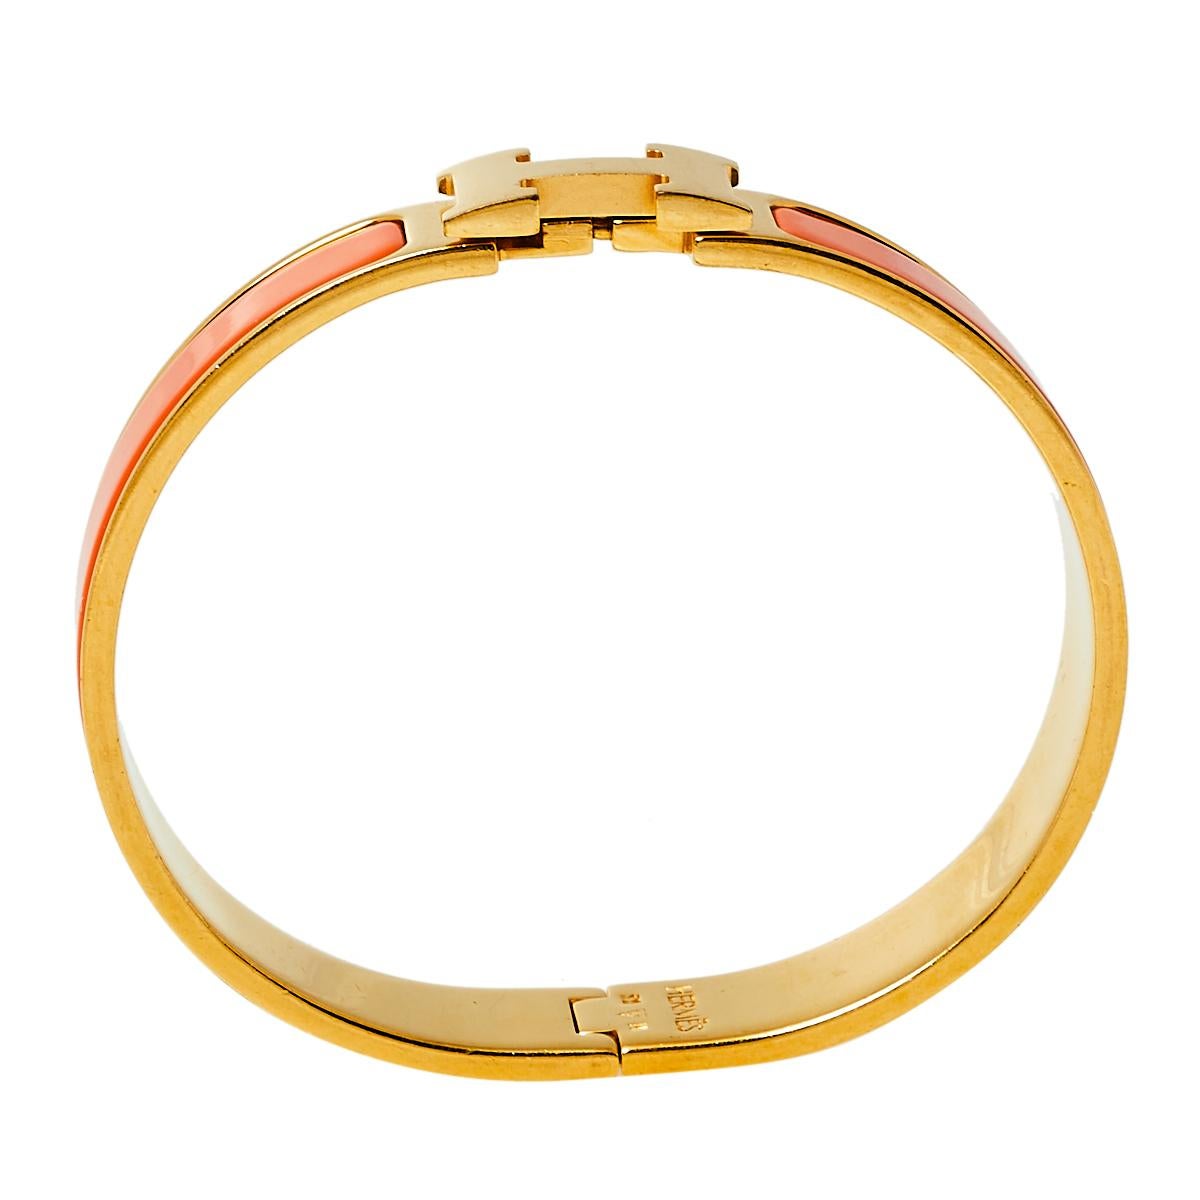 This Clic H bracelet embodies Hermès’ elegant craftsmanship with its gold-plated metal body and orange enamel inlay. Featuring the iconic H logo of the fashion house at the front, this bracelet is the accessory to buy today!

